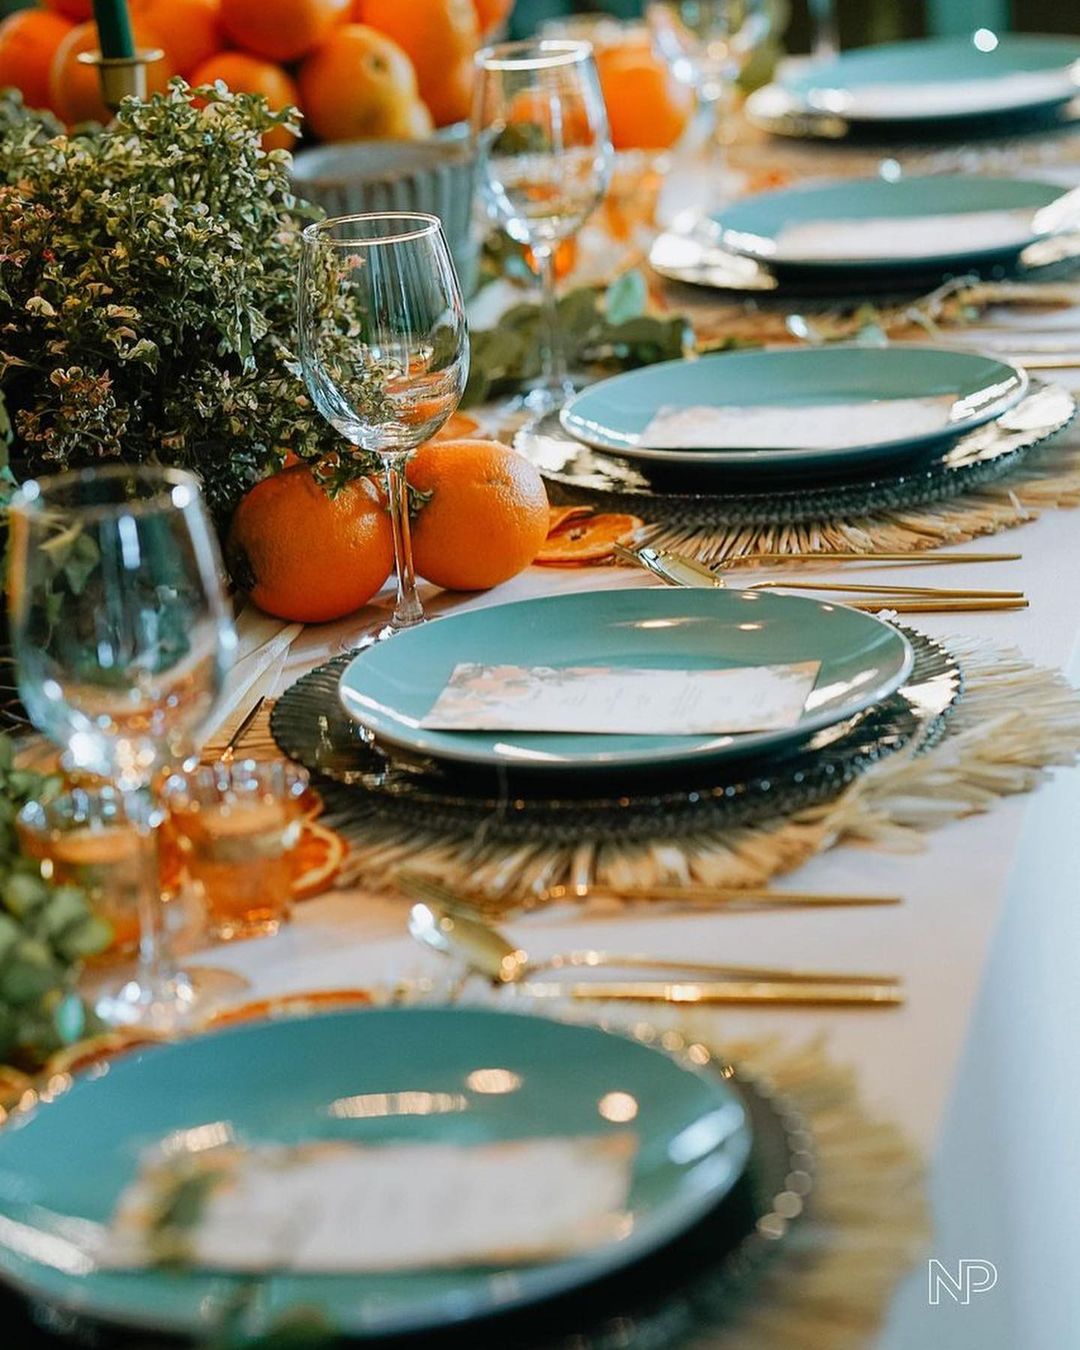 Angel Locsin throws a Thanksgiving dinner for her family - dining table setup